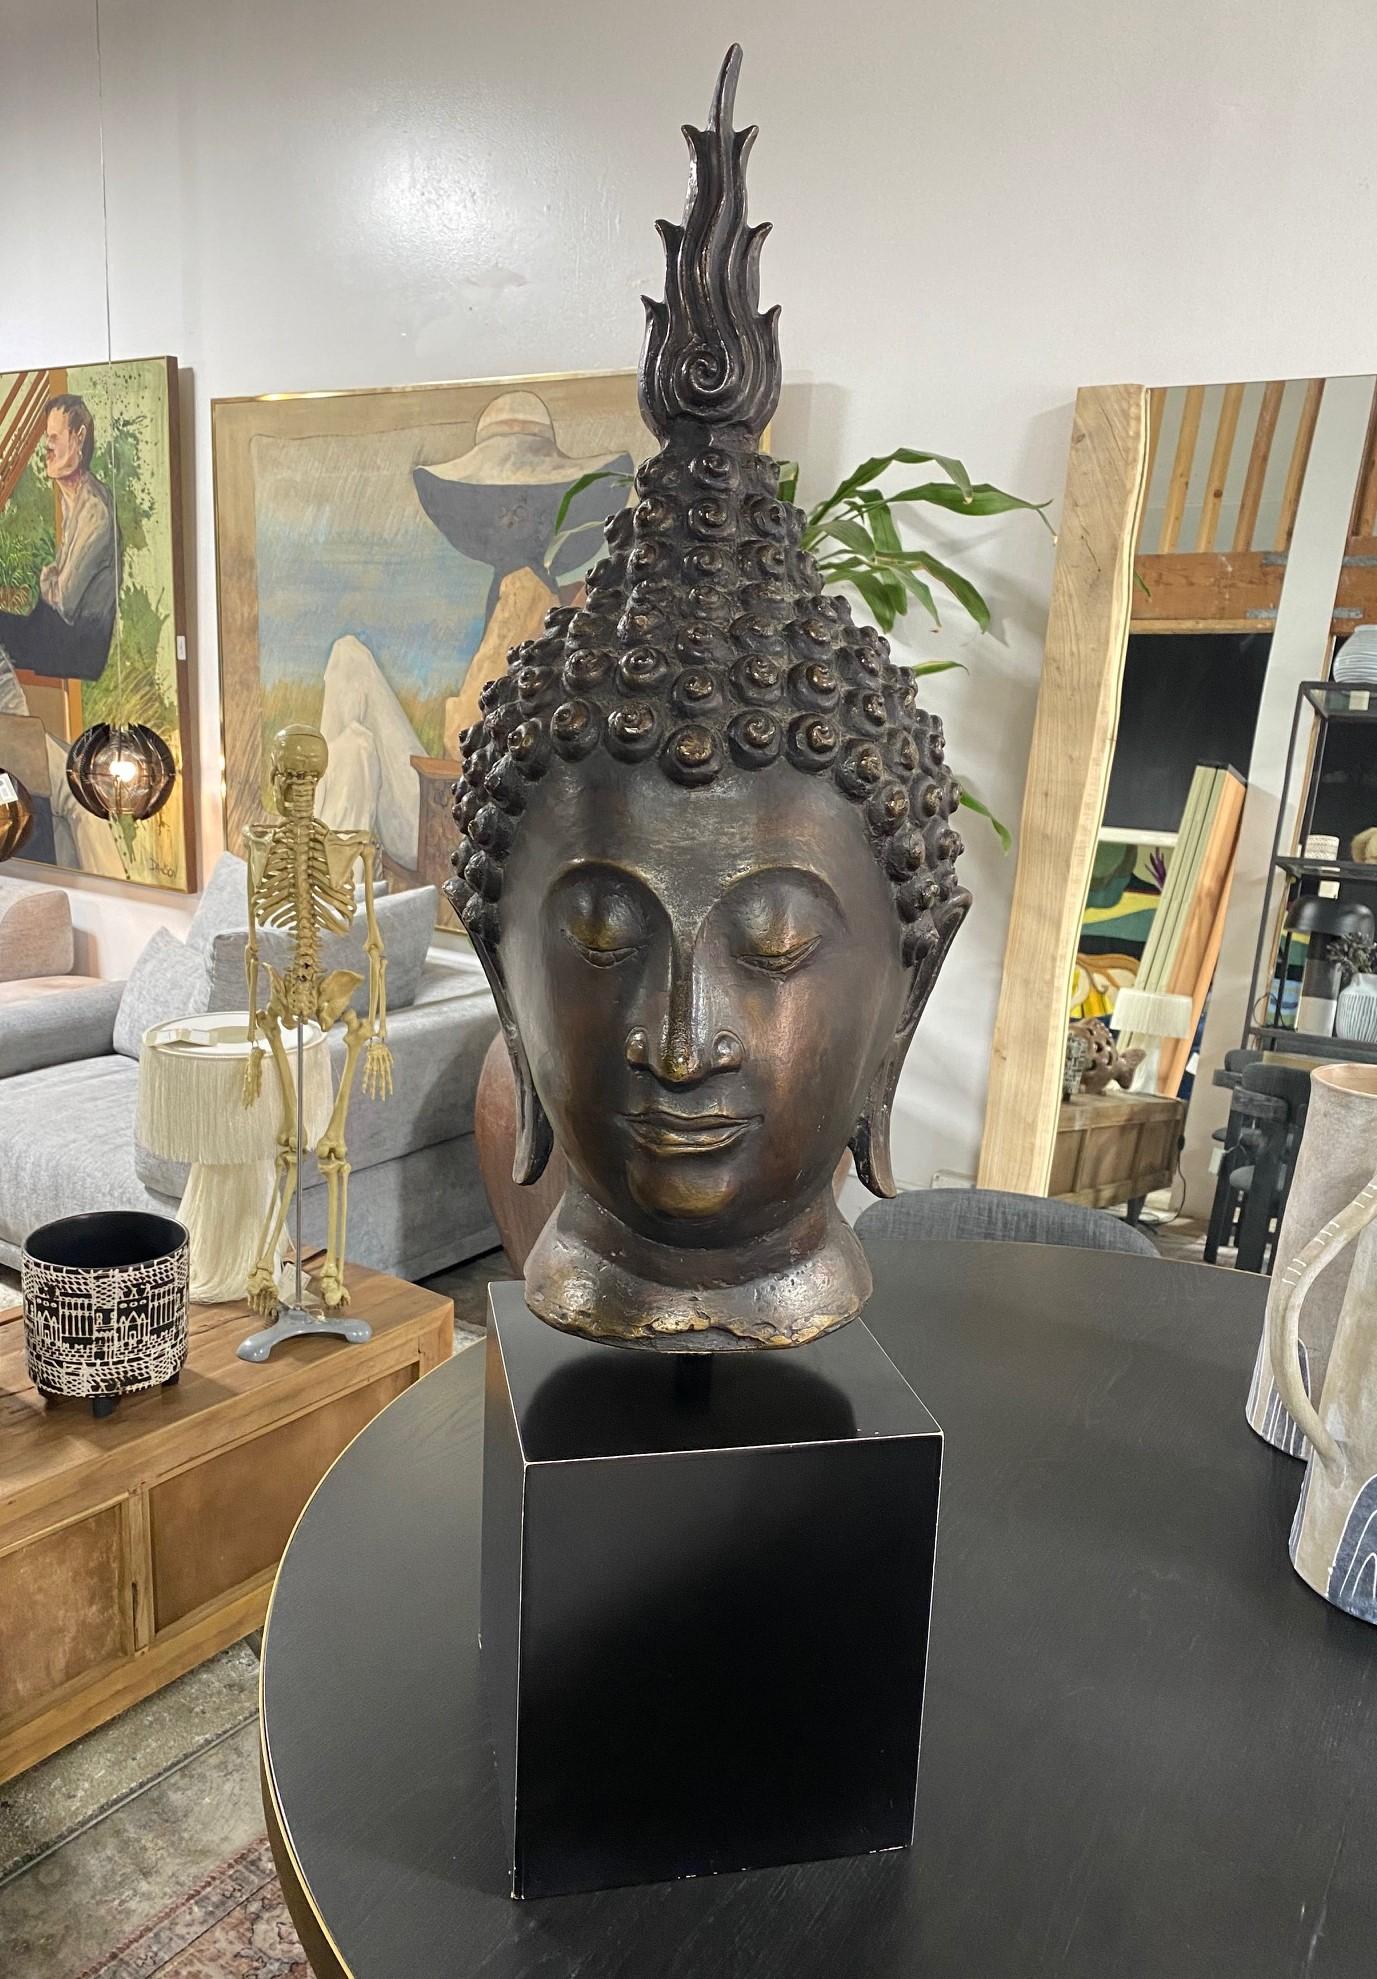 This is truly a spectacular work A beautifully sculptured Buddha head (the features and finial suggest that it is Thai/ Siam) on a custom display stand. The Buddha's eyes are semi-closed in serene meditation. The work has a nice almost bronze-like